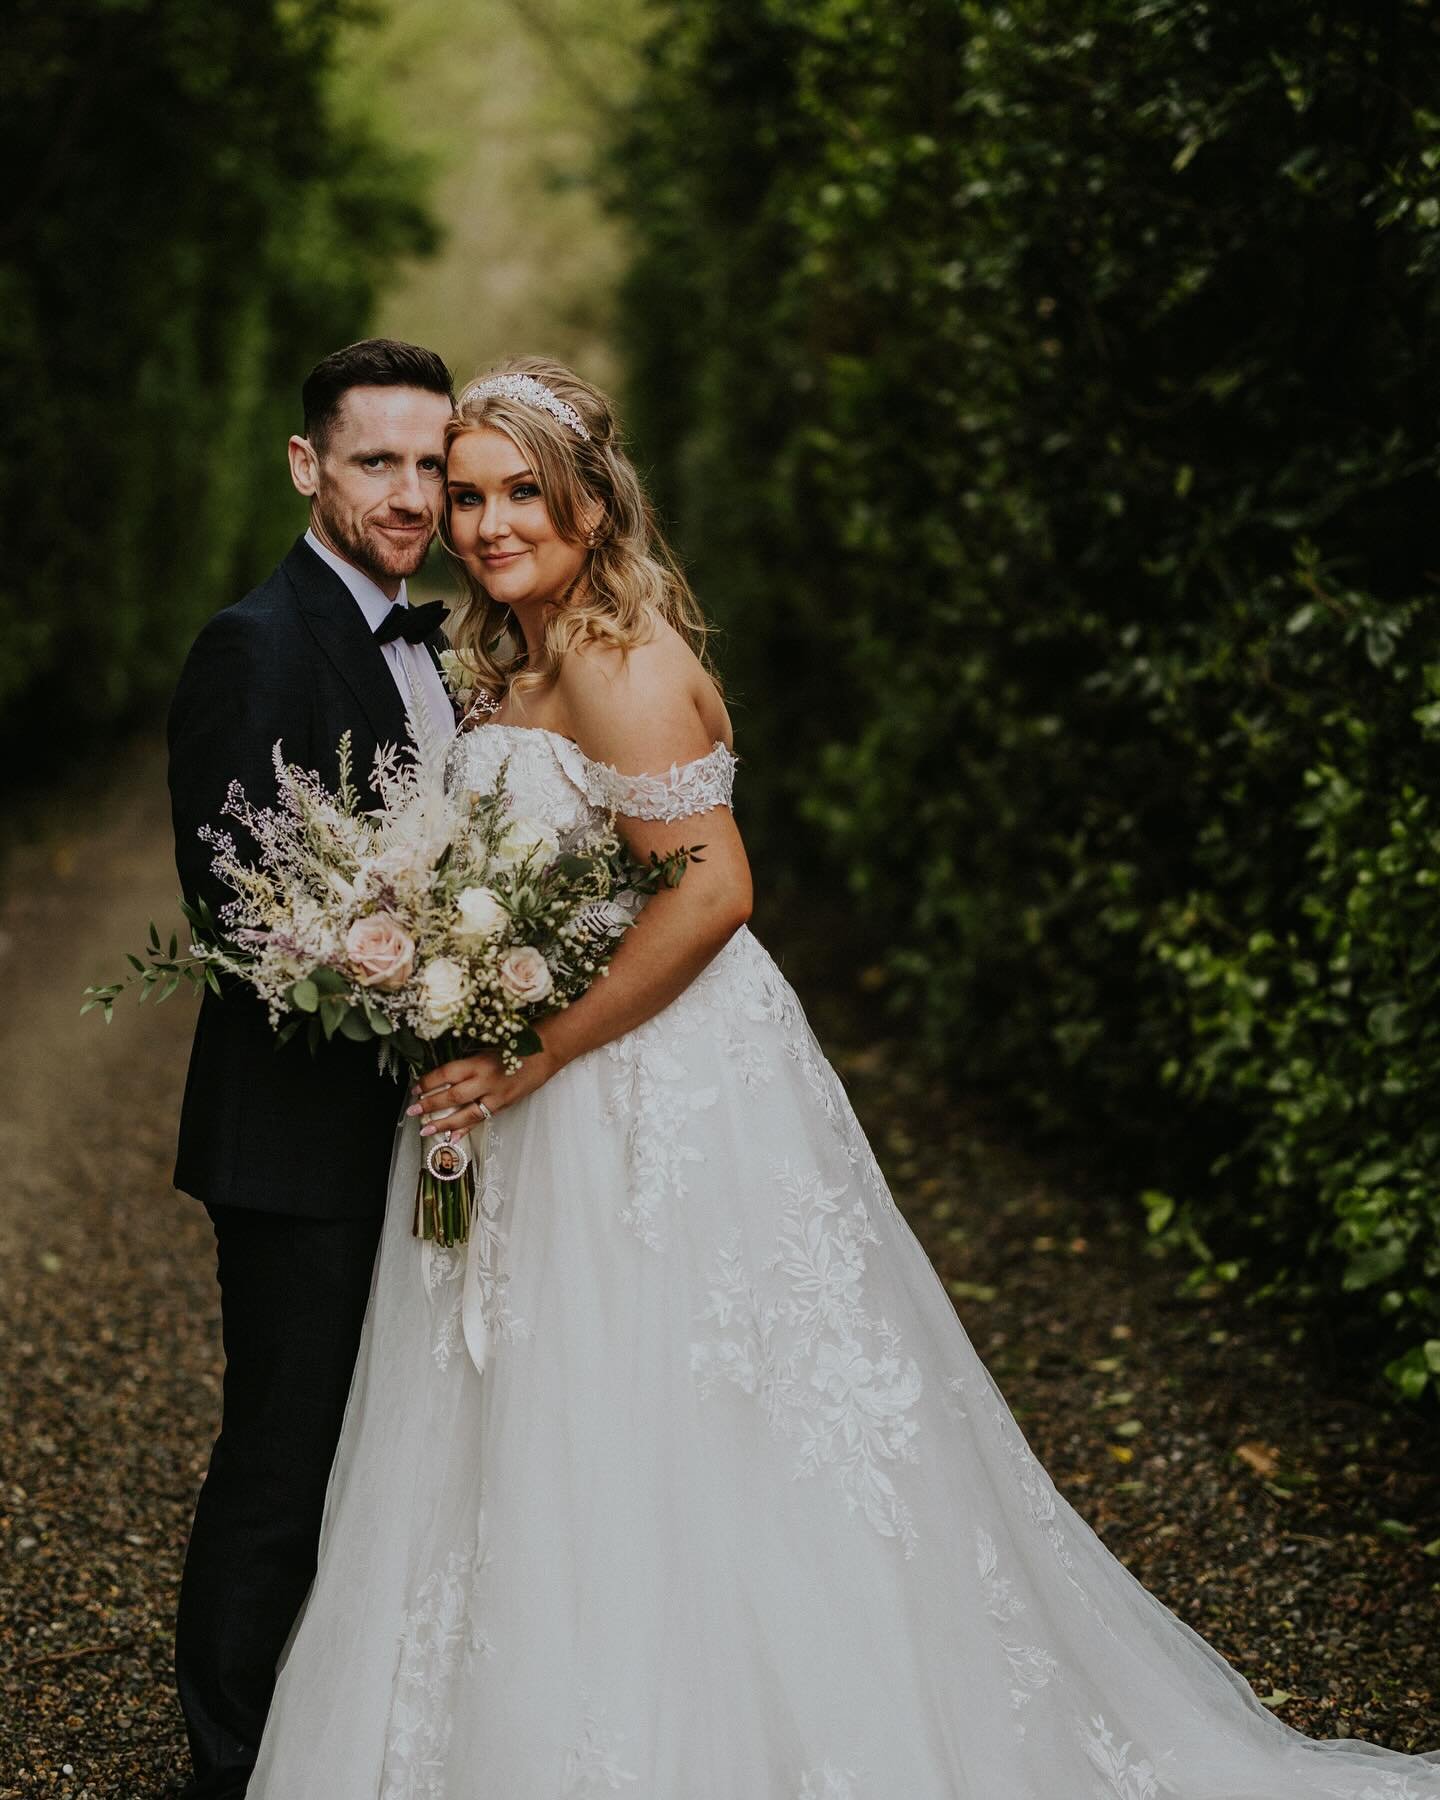 What a day! Laugh a minute wedding with Courtney &amp; Austin who celebrated their marriage at @fourseasonshotelcarlingford! So much craic my face was hurting from laughing so much! Courtney &amp; Austin thank you both so much for having us! ❤️

@pri